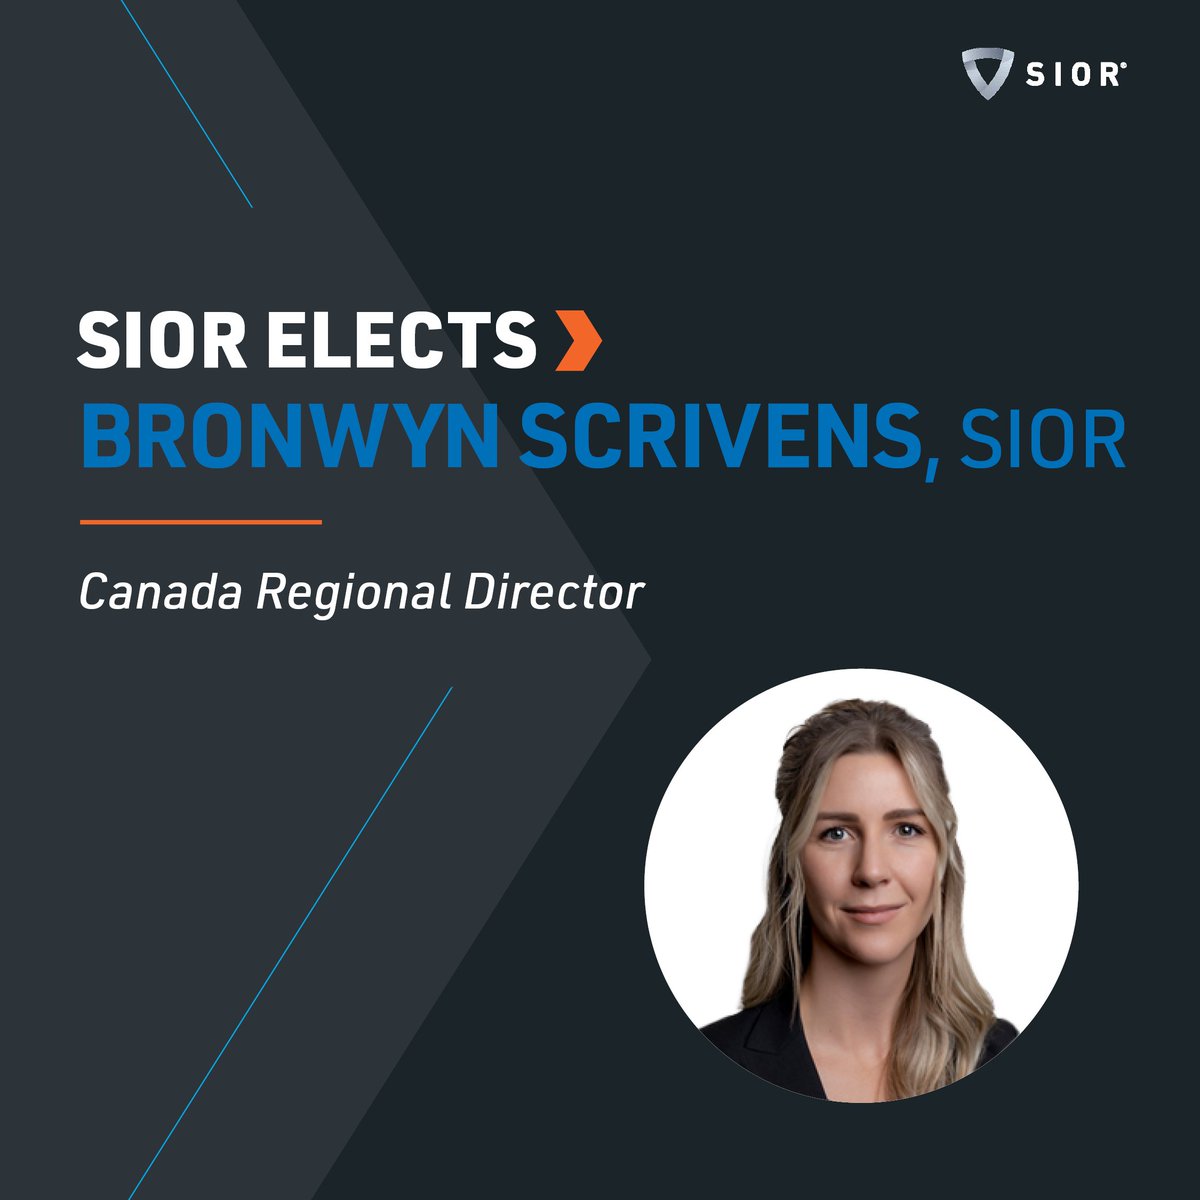 Cheers to @bronwynscrivens, SIOR, for her election to serve as SIOR Canada Regional Director! Consistently a top producing agent both nationally and internationally, she brings with her a tremendous amount of experience that will surely shine through in her new role. #SIOR